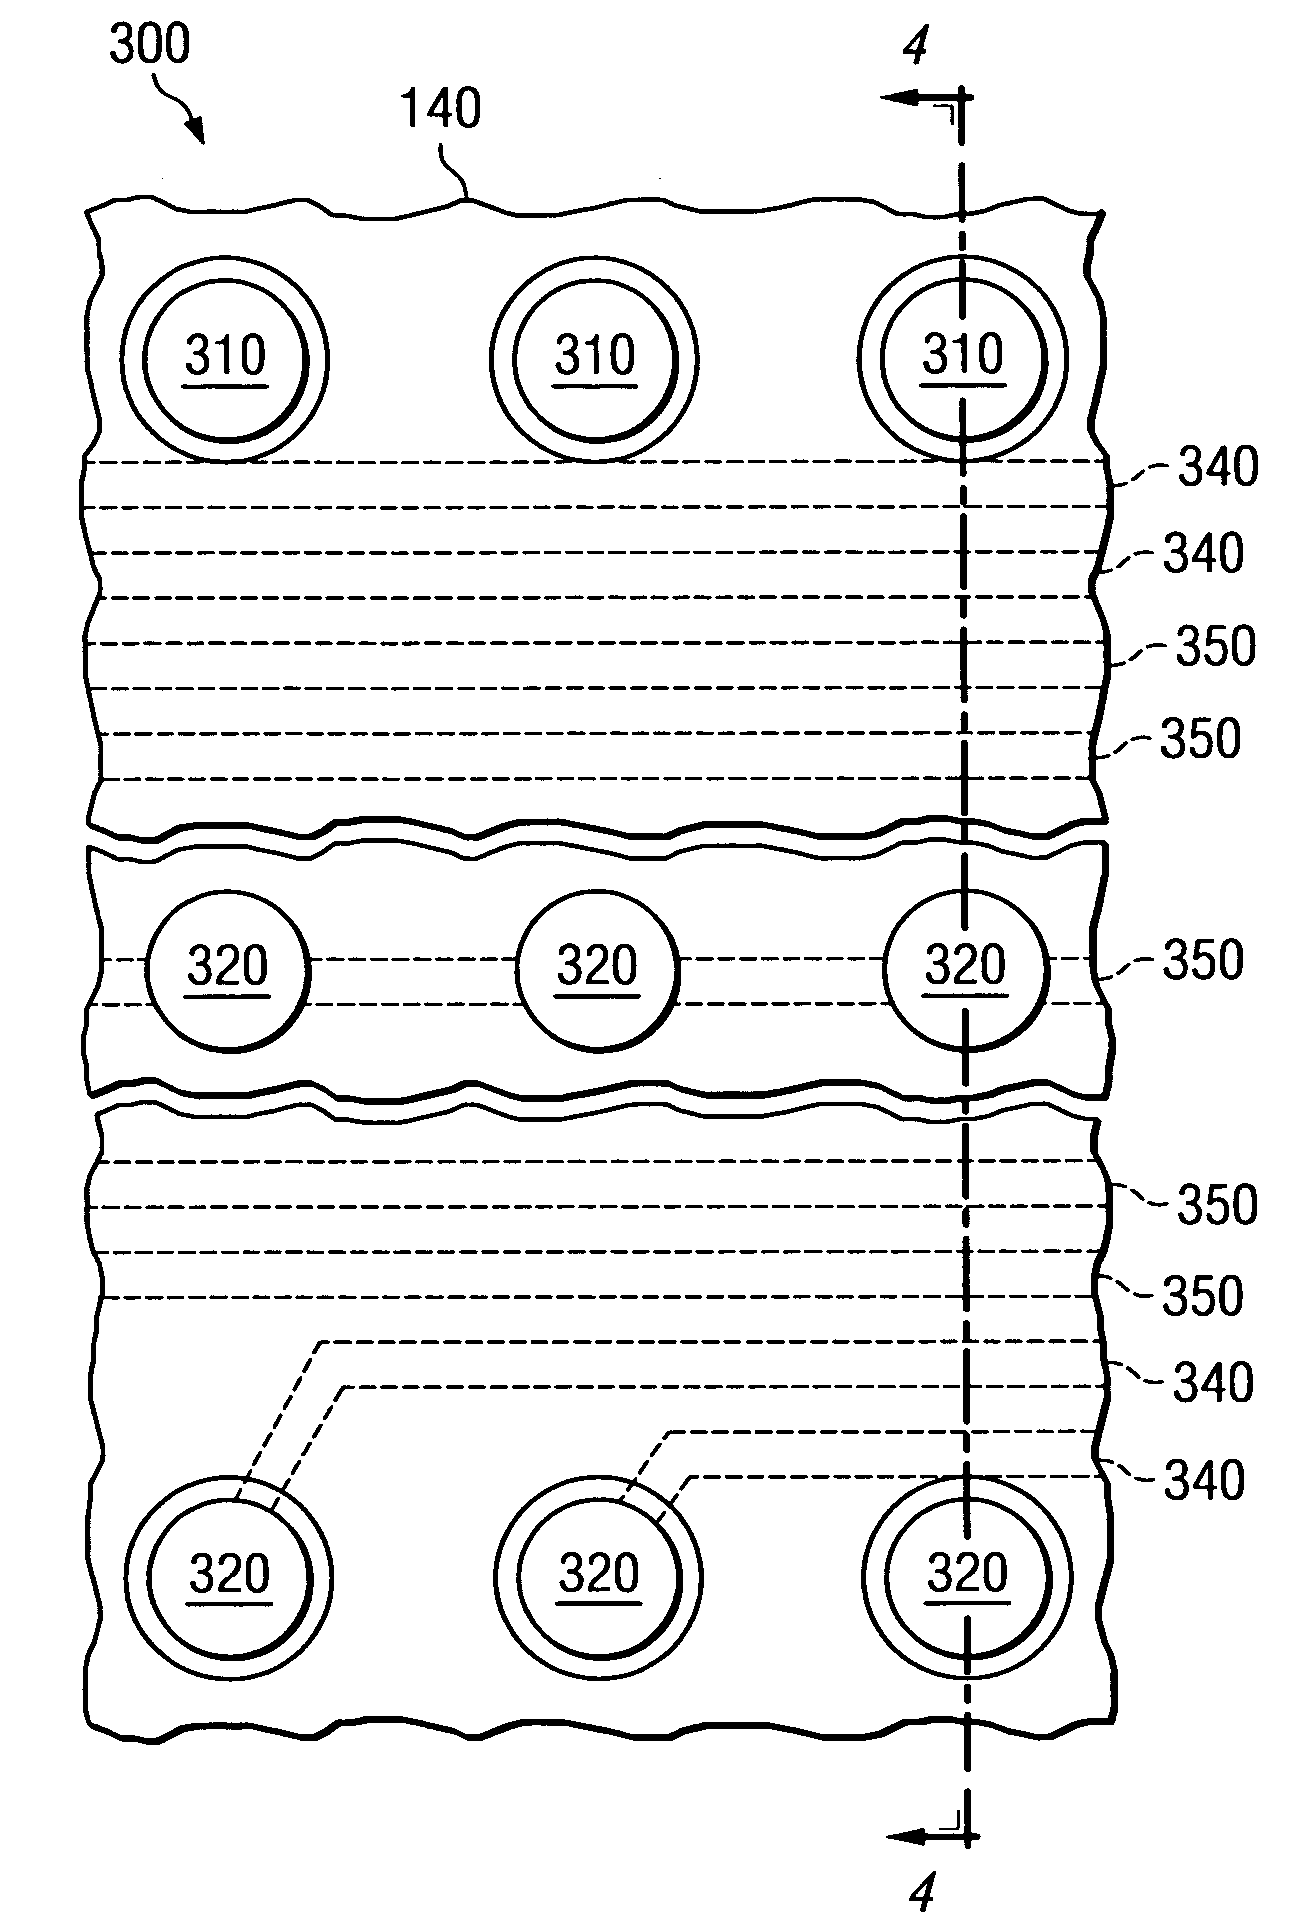 System and method for increasing wiring channels/density under dense via fields